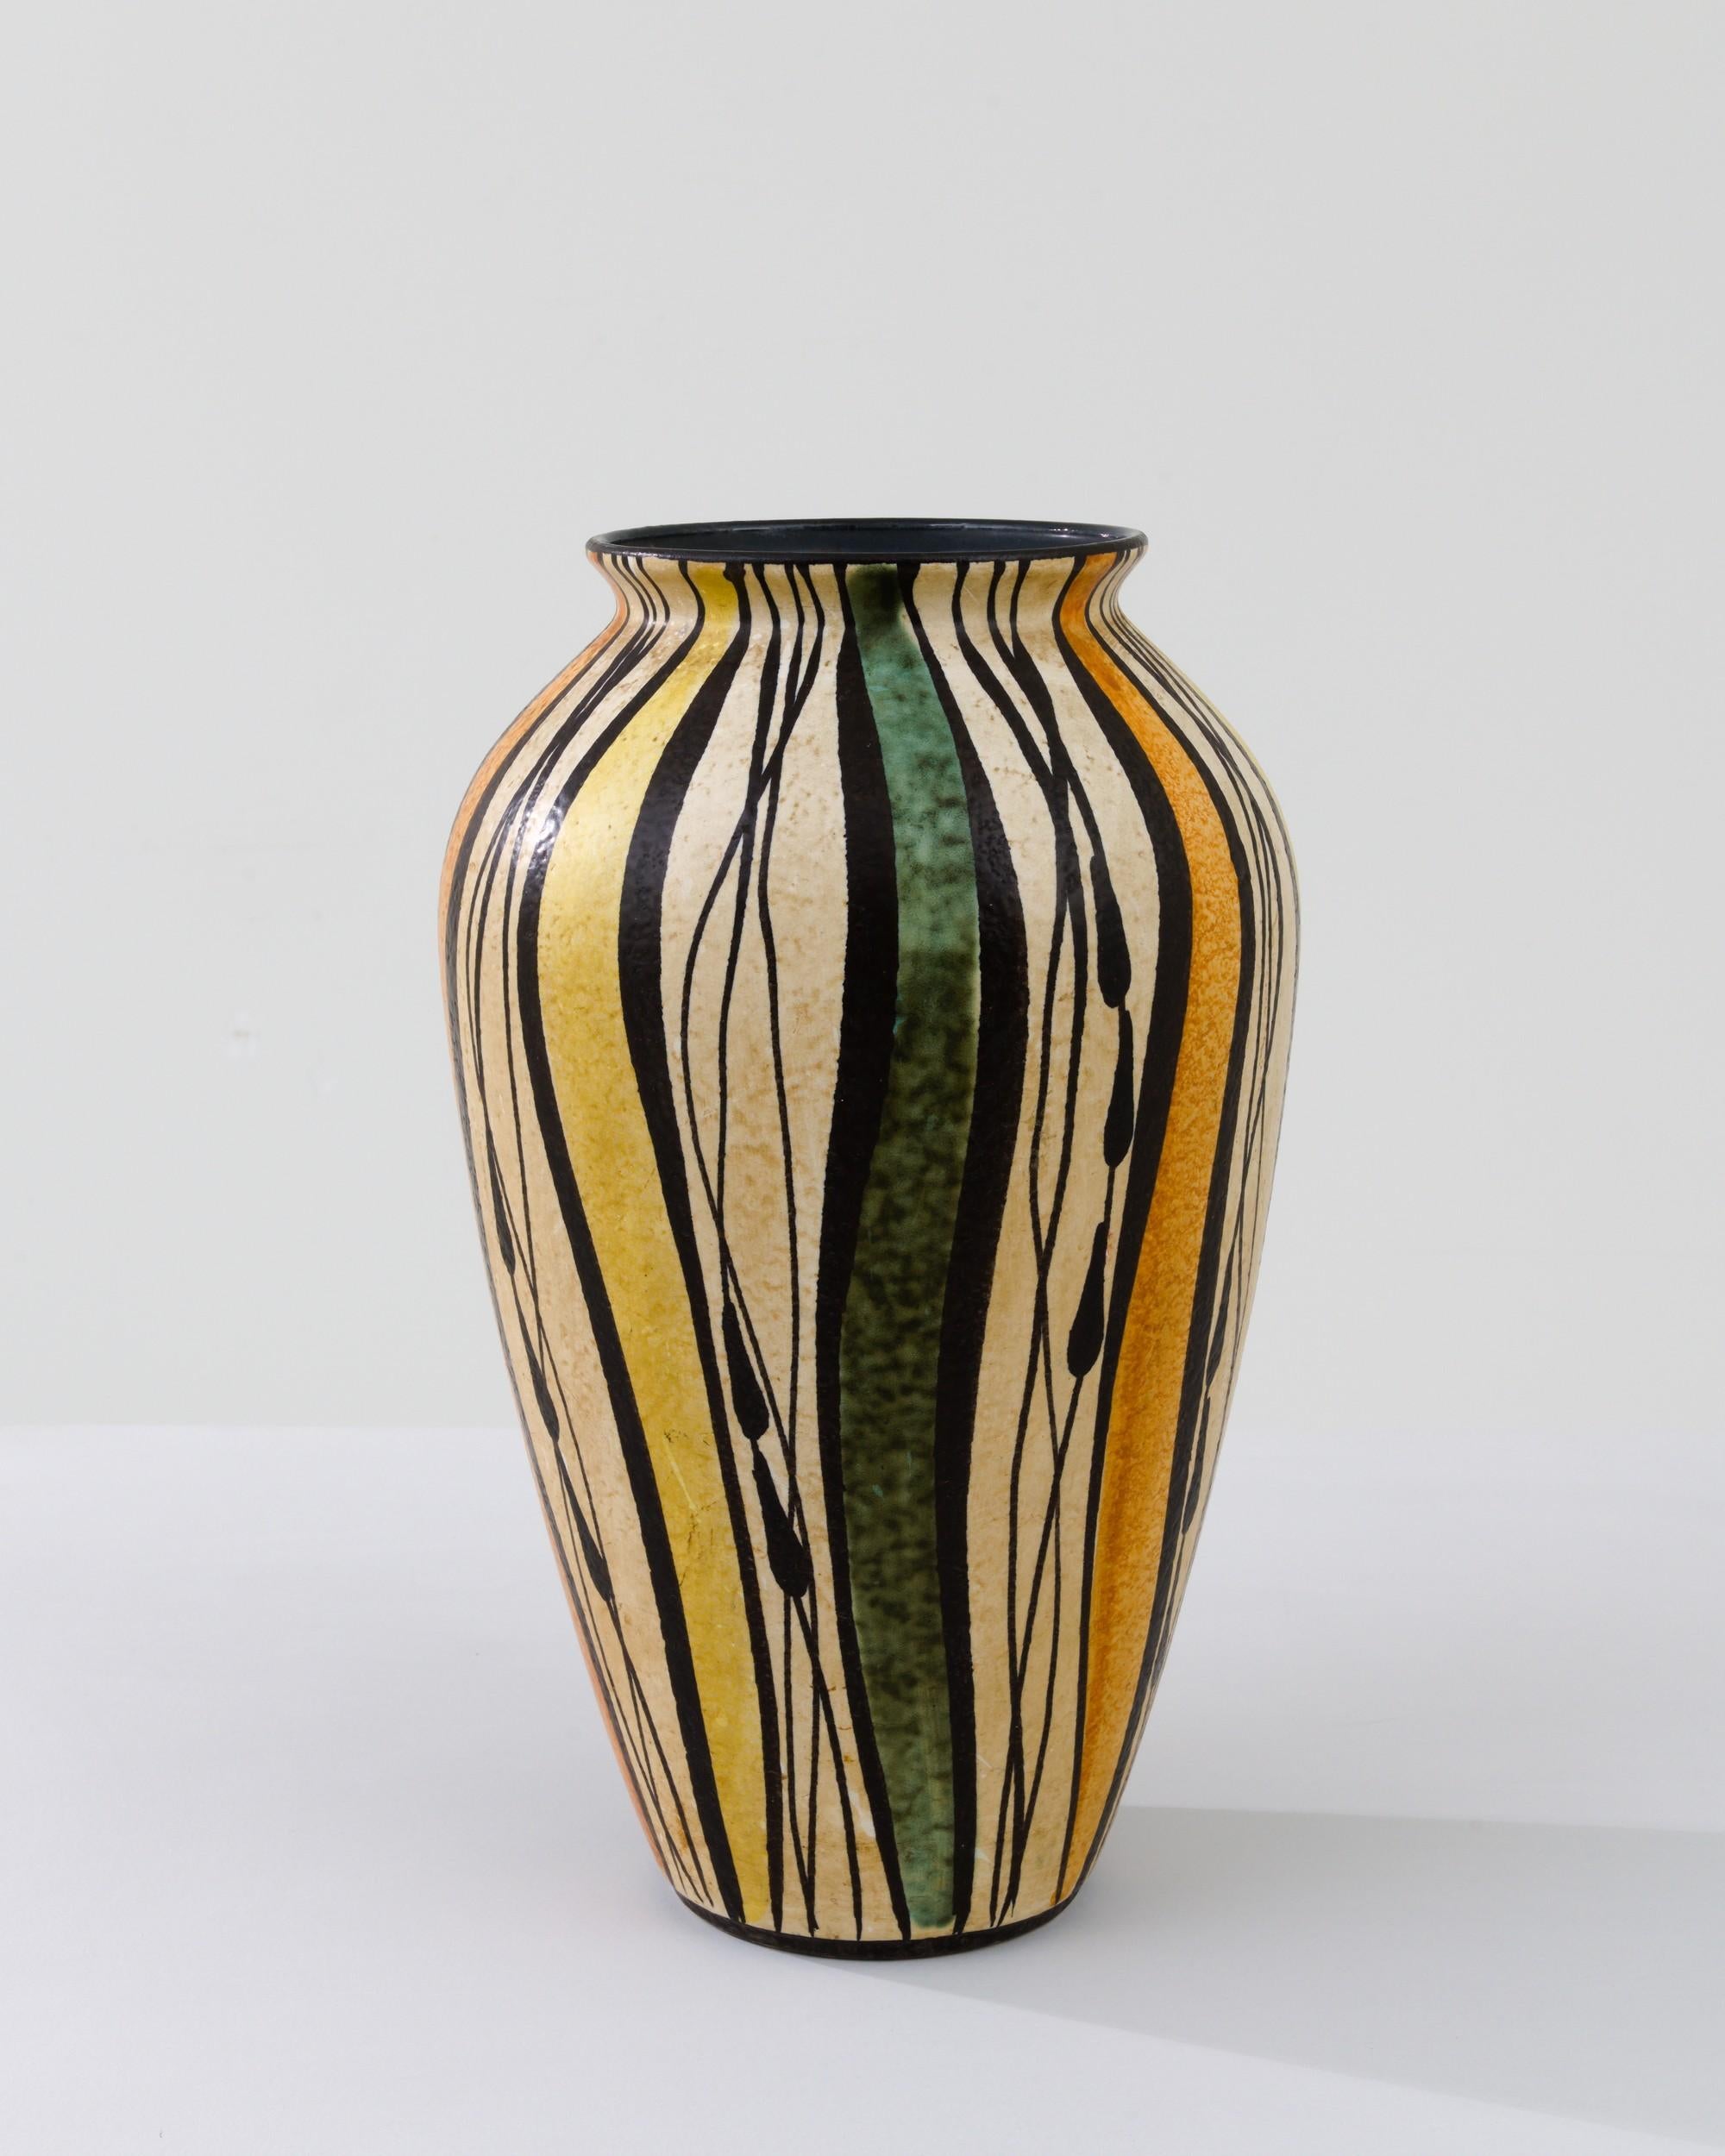 A ceramic vase from mid-20th century Germany. Neither large nor small, this studio made pot reflects the hand-held, and the handmade; the tactility of process and the artist's vision– realized on the potter’s wheel. Graphic lines cut through